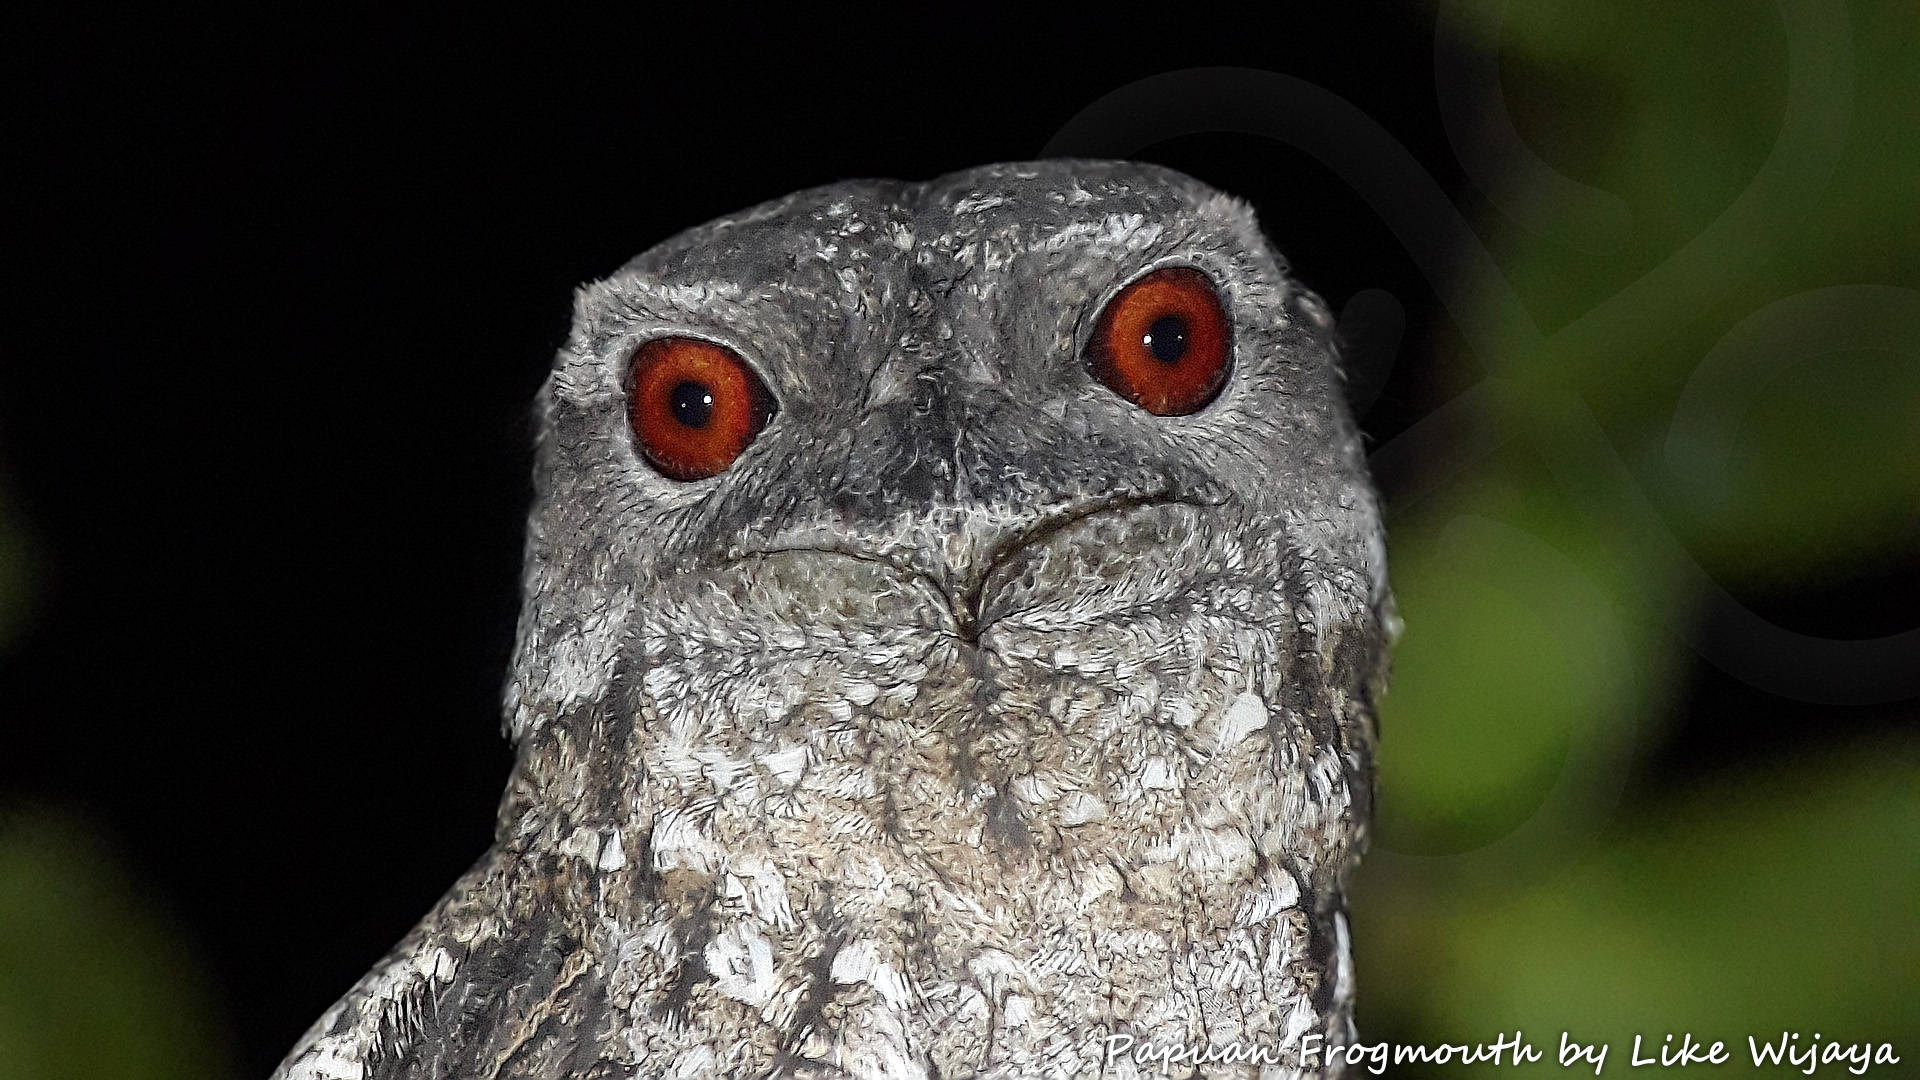 The impressive Papuan Frogmouth Podargus papuensis occurs throughout the lowlands of the New Guinea or Papuan avifaunal region and potentially can be seen on all of our five birding walks. Copyright © Like Wijaya